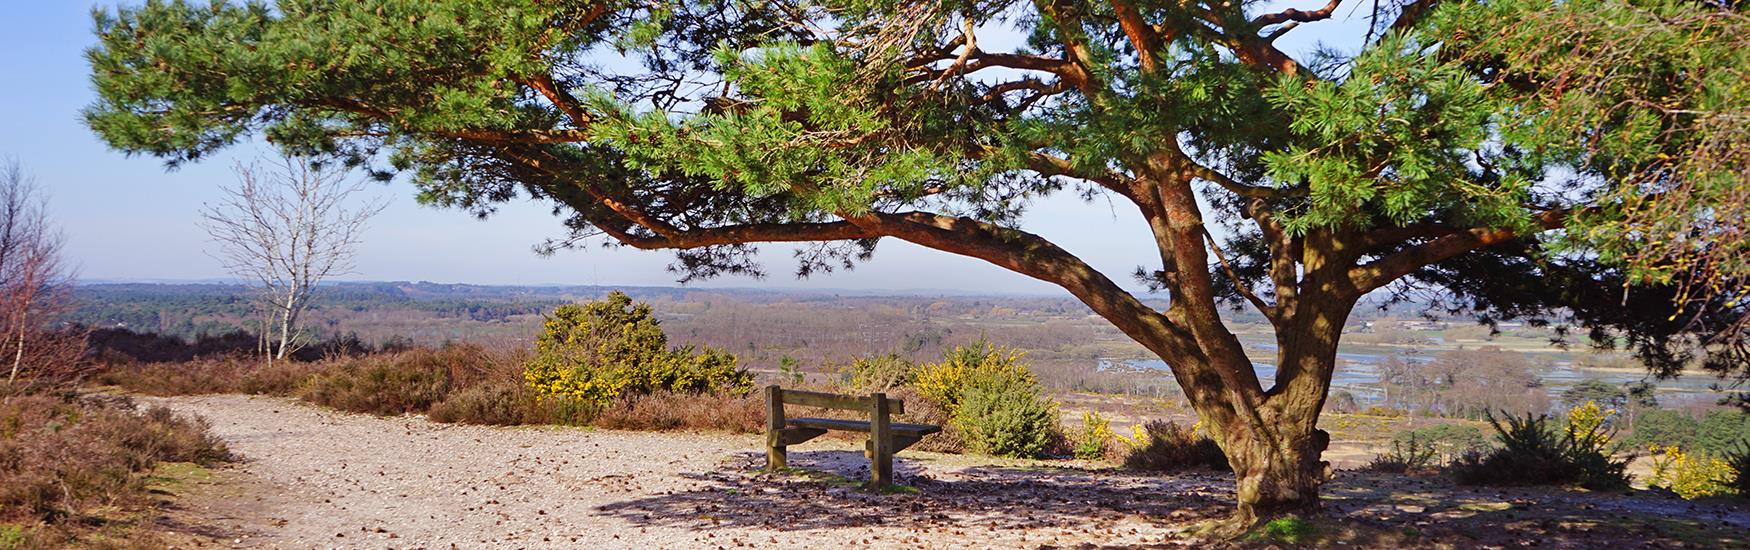 A lonely bench sits under a lush green tree with views of the Christchurch countryside